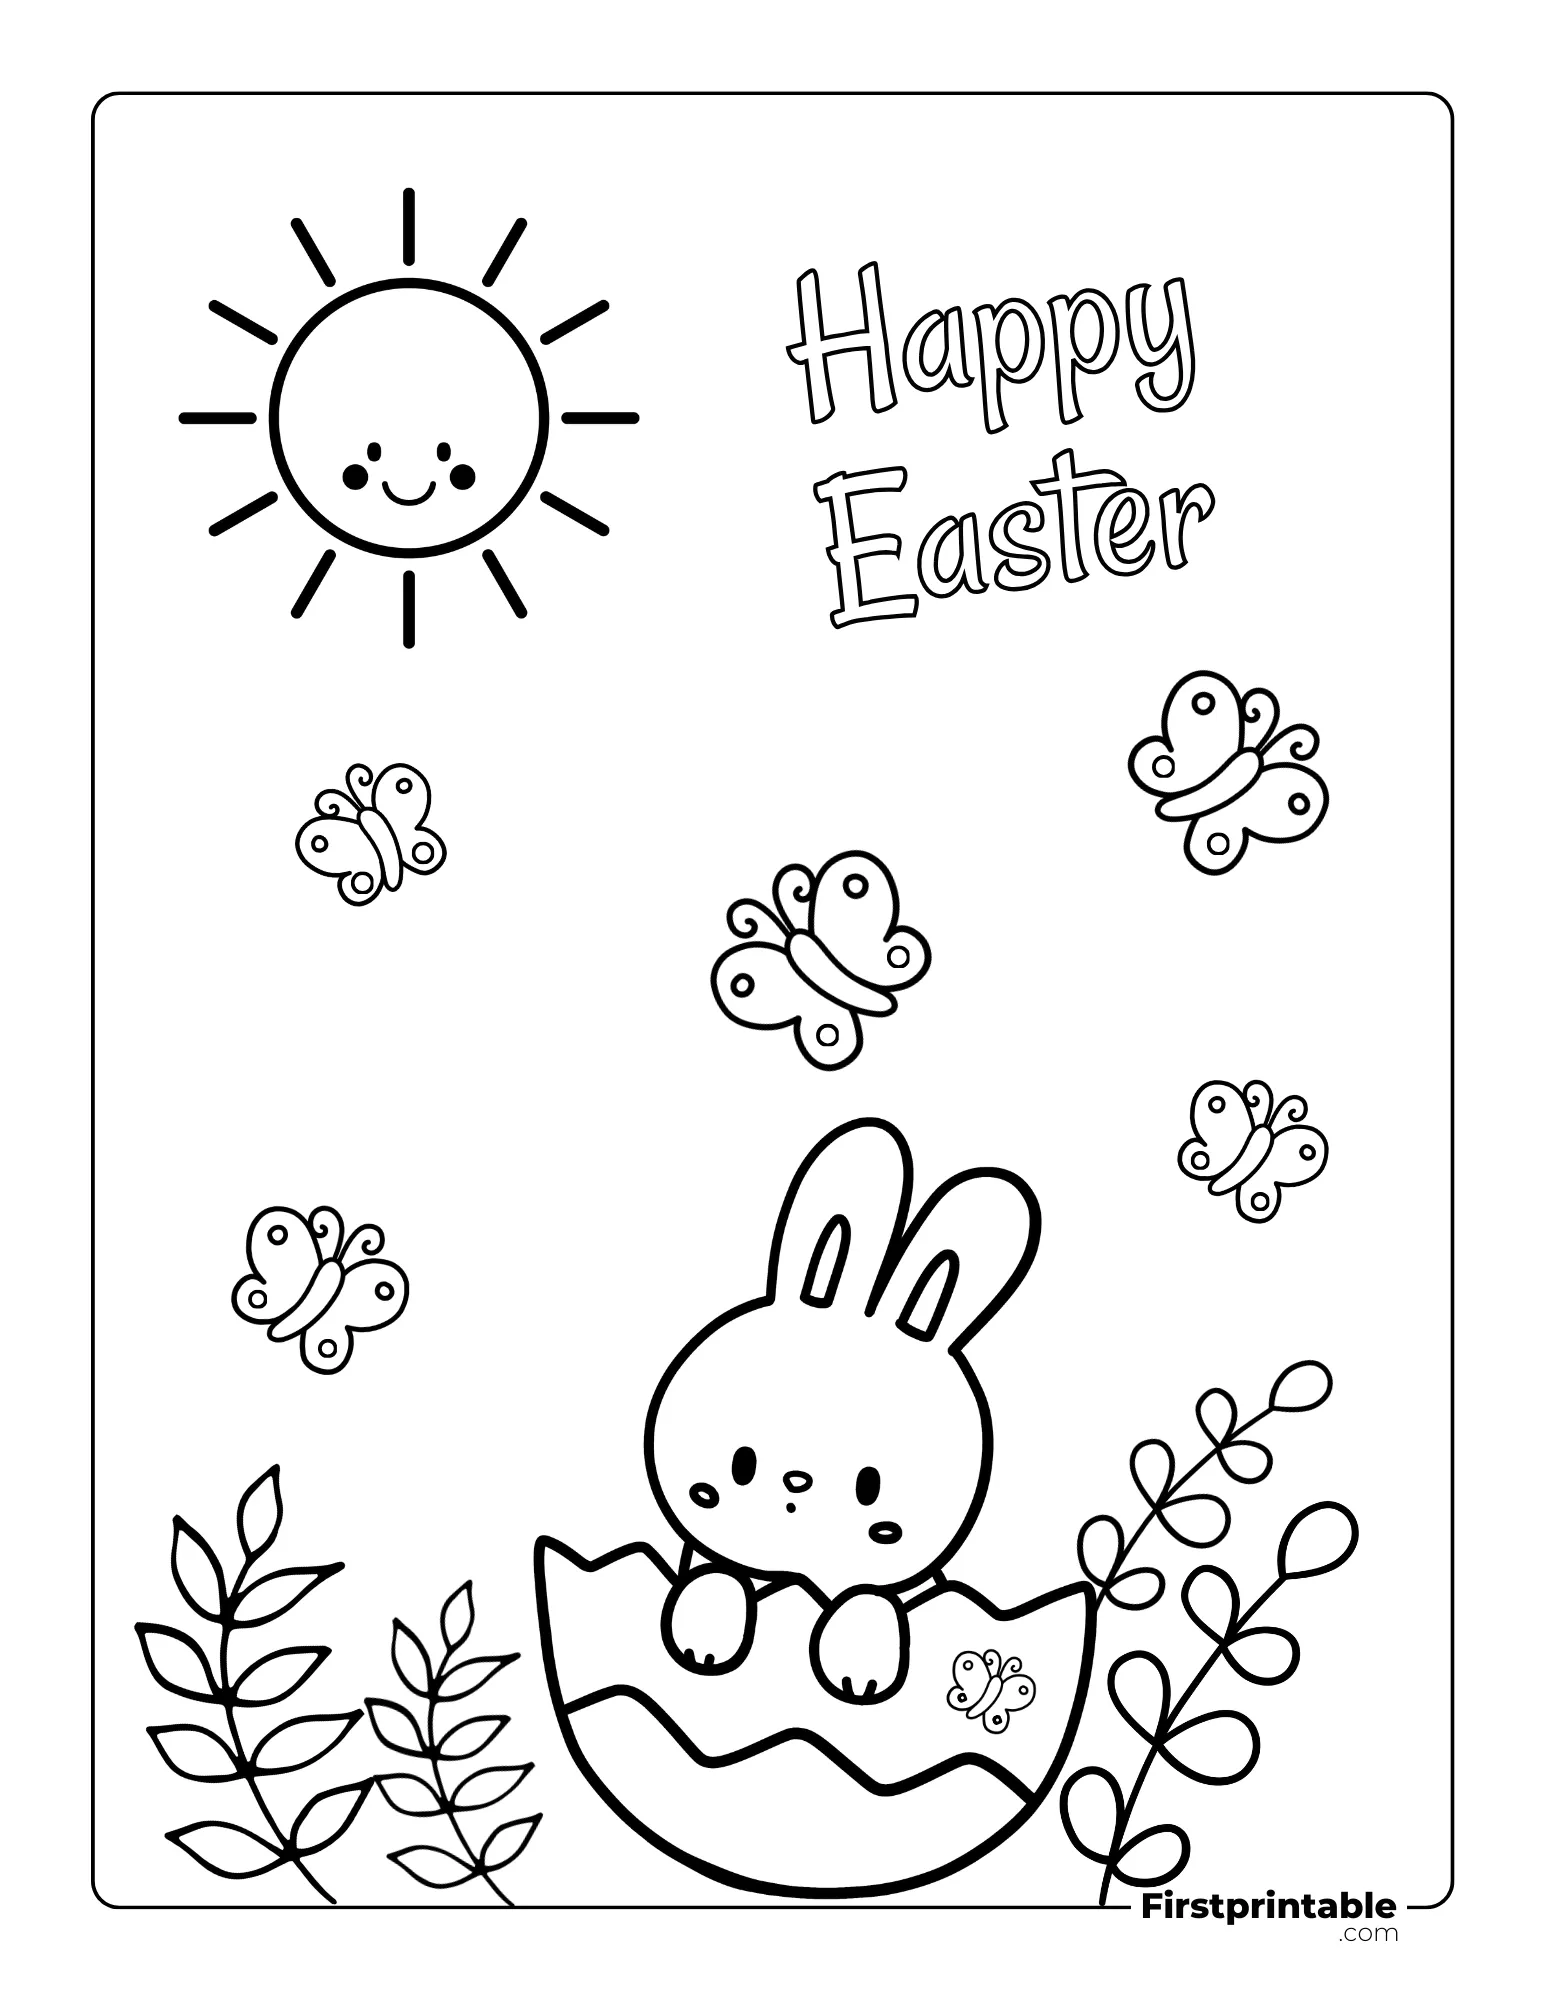 Easter Egg and bunny coloring page